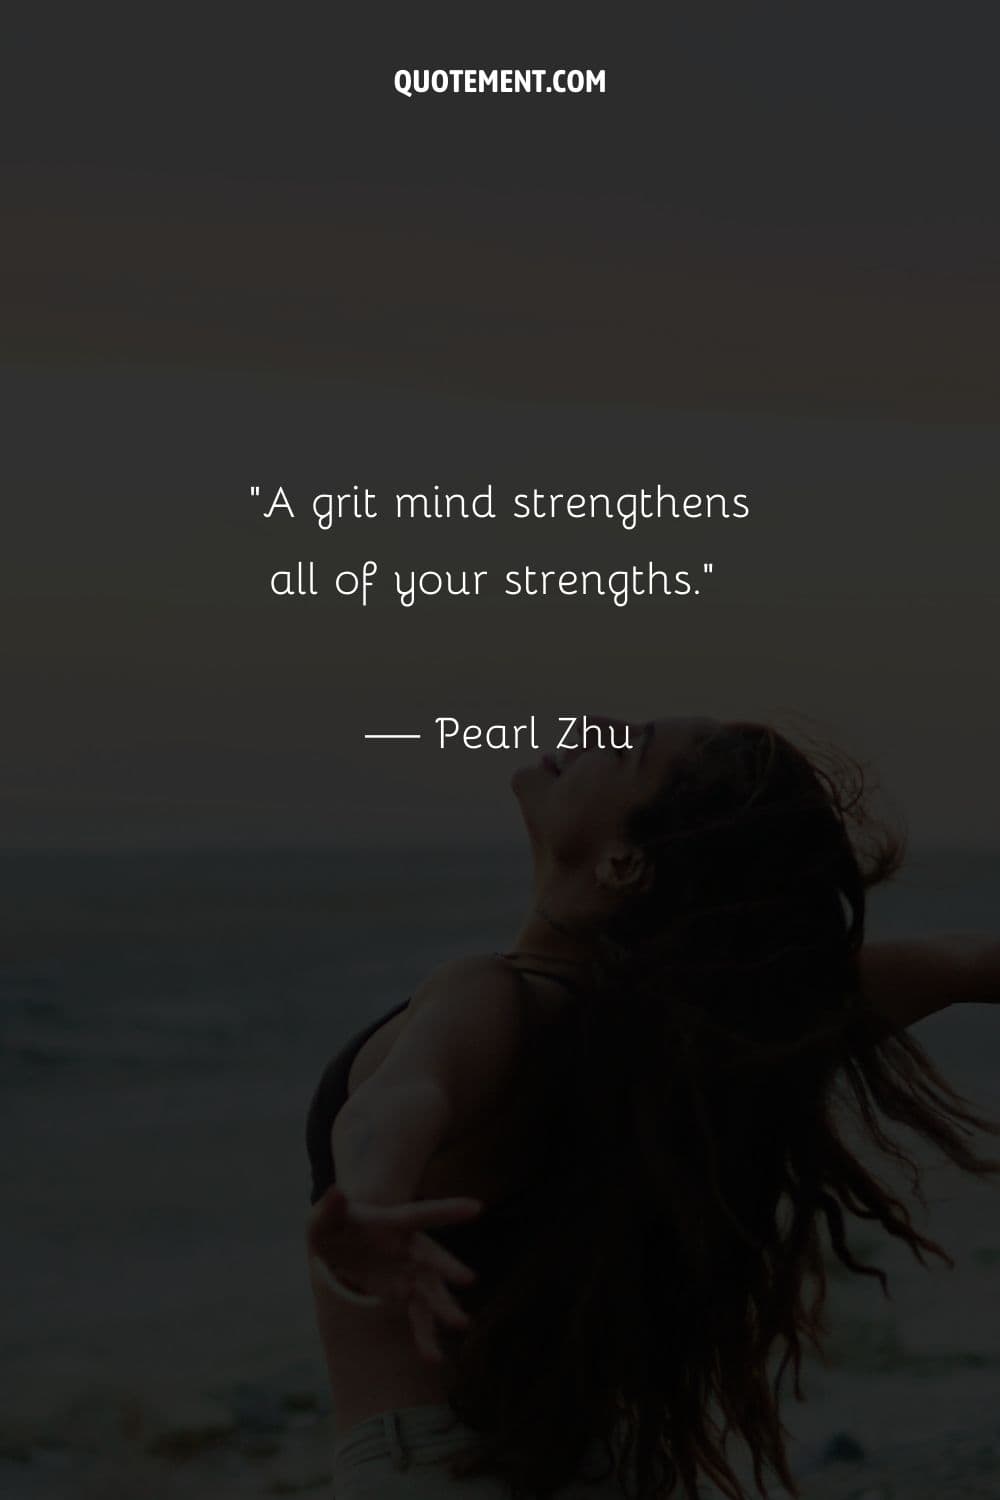 A grit mind strengthens all of your strengths